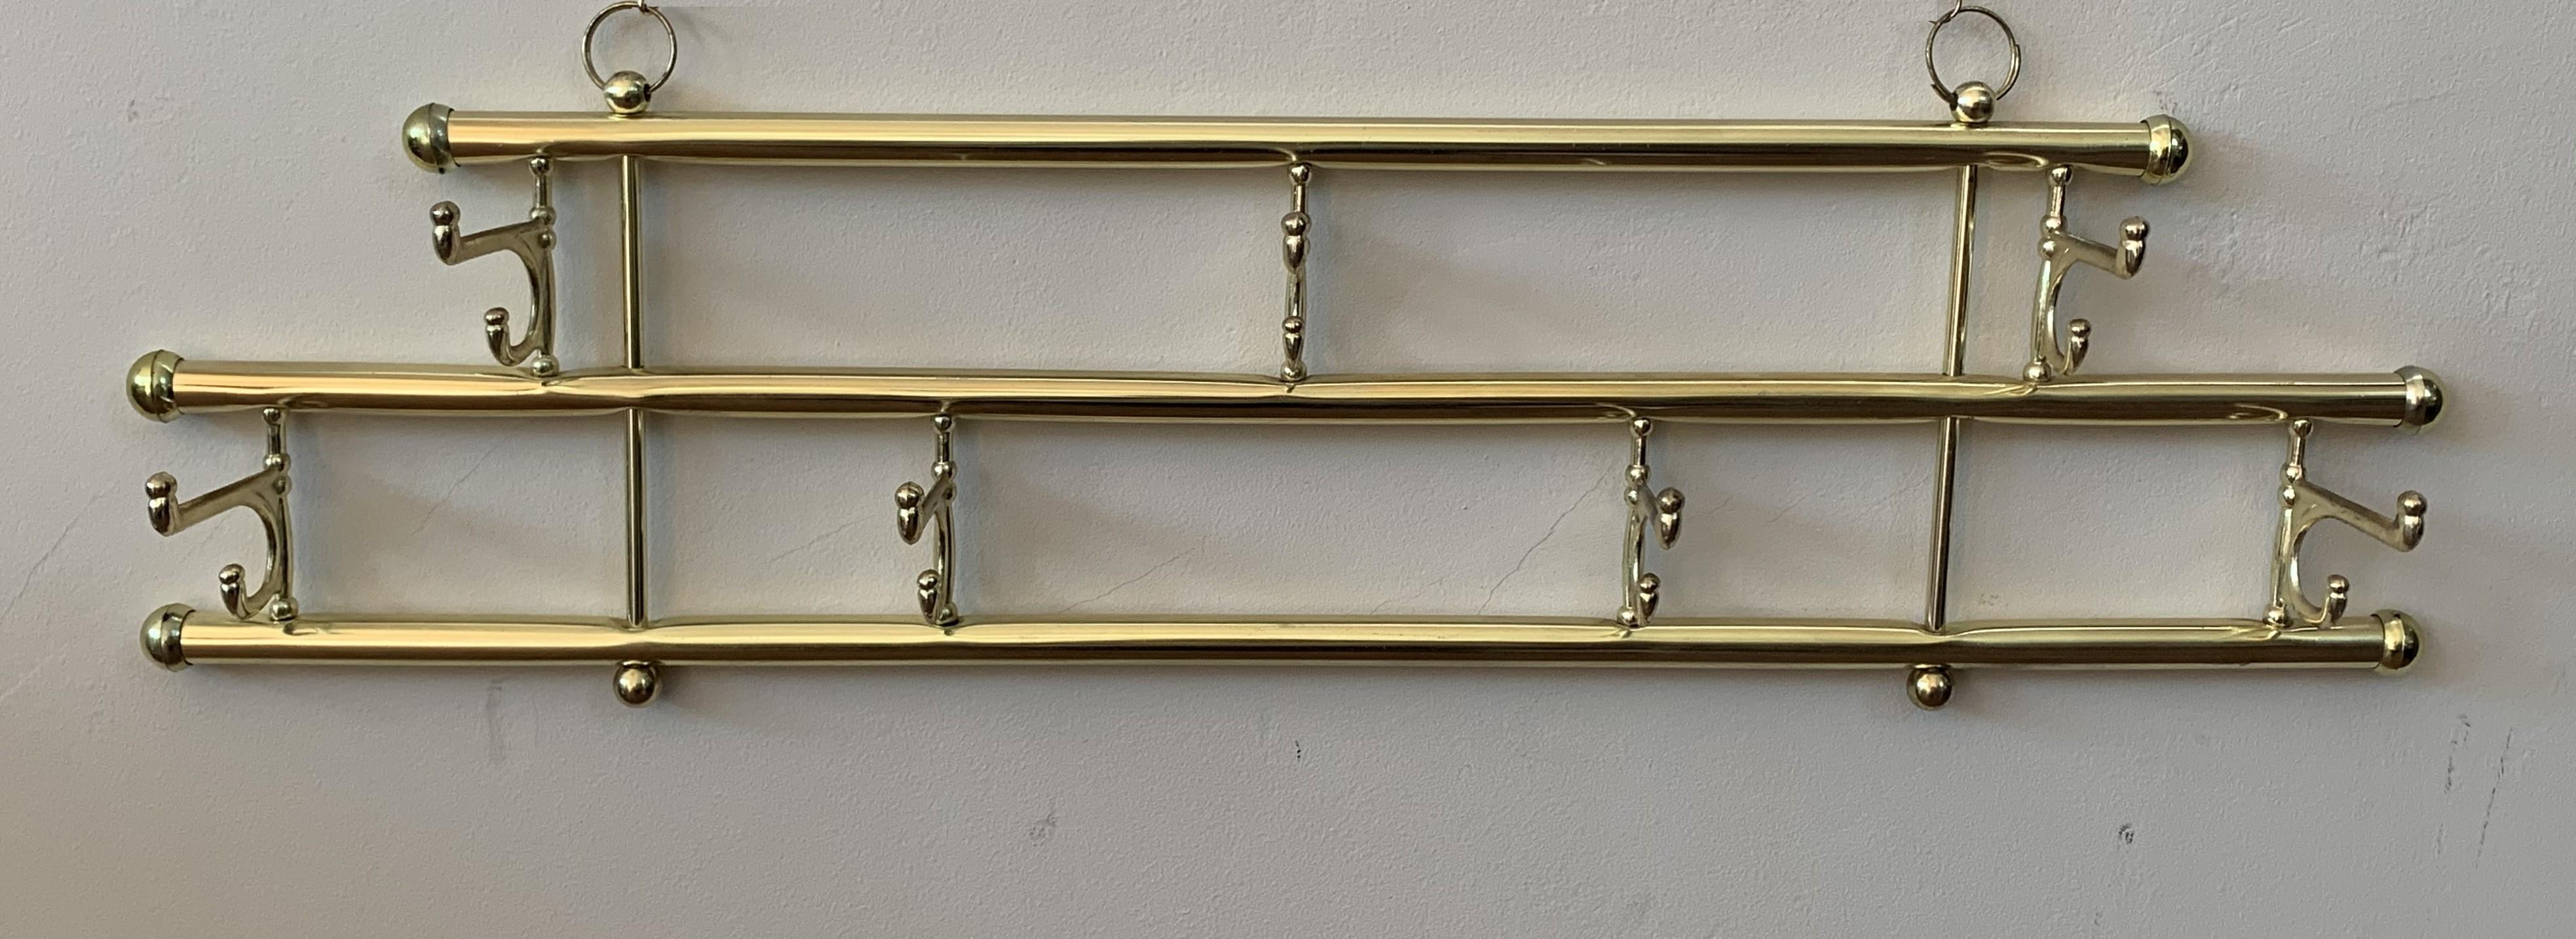 Midcentury / Art Deco foldable wall coat rack in brass

Foldable with seven hangers

Very good vintage condition.